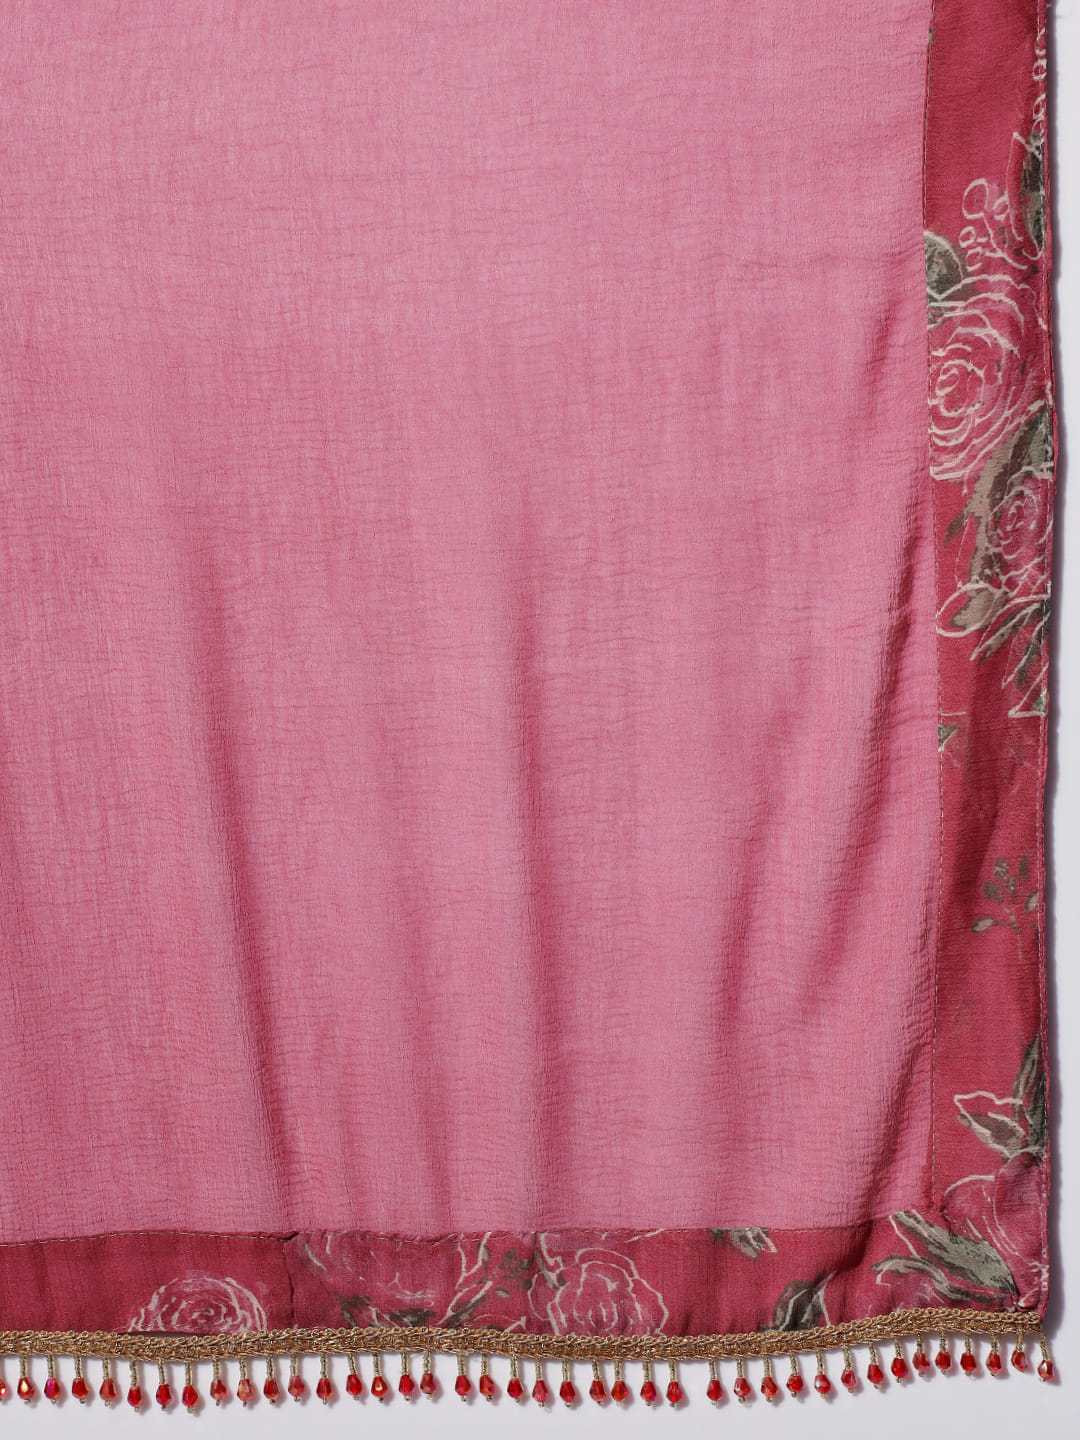 Pink Perfection: An Ethereal Ethnic Dress | Hues of India